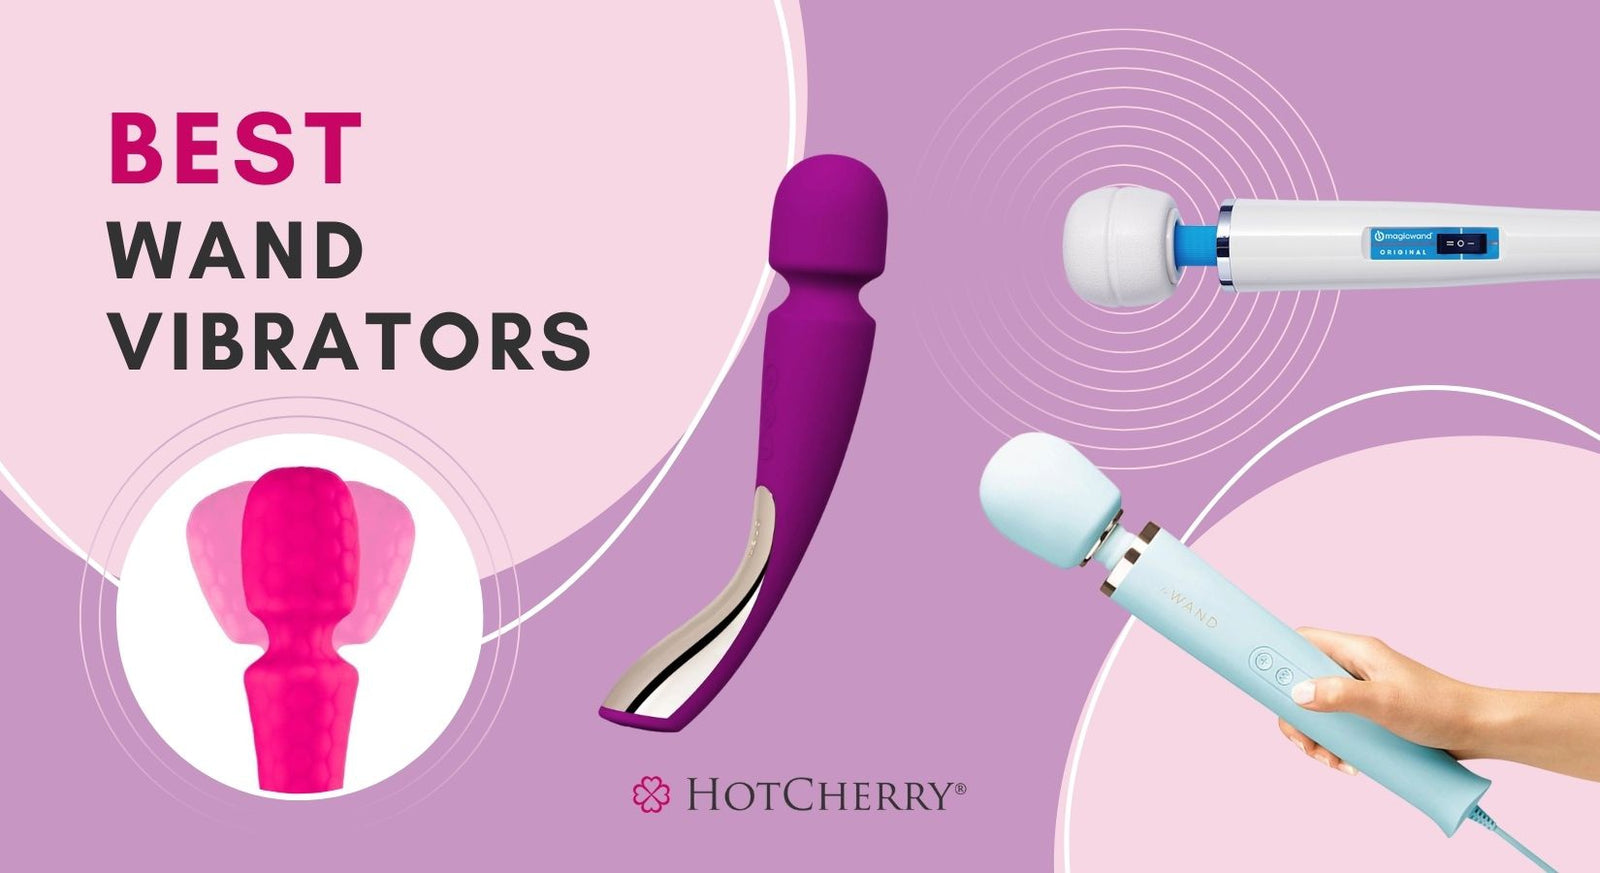 10 Best Wand Vibrators for Incredible Clitoral Orgasm